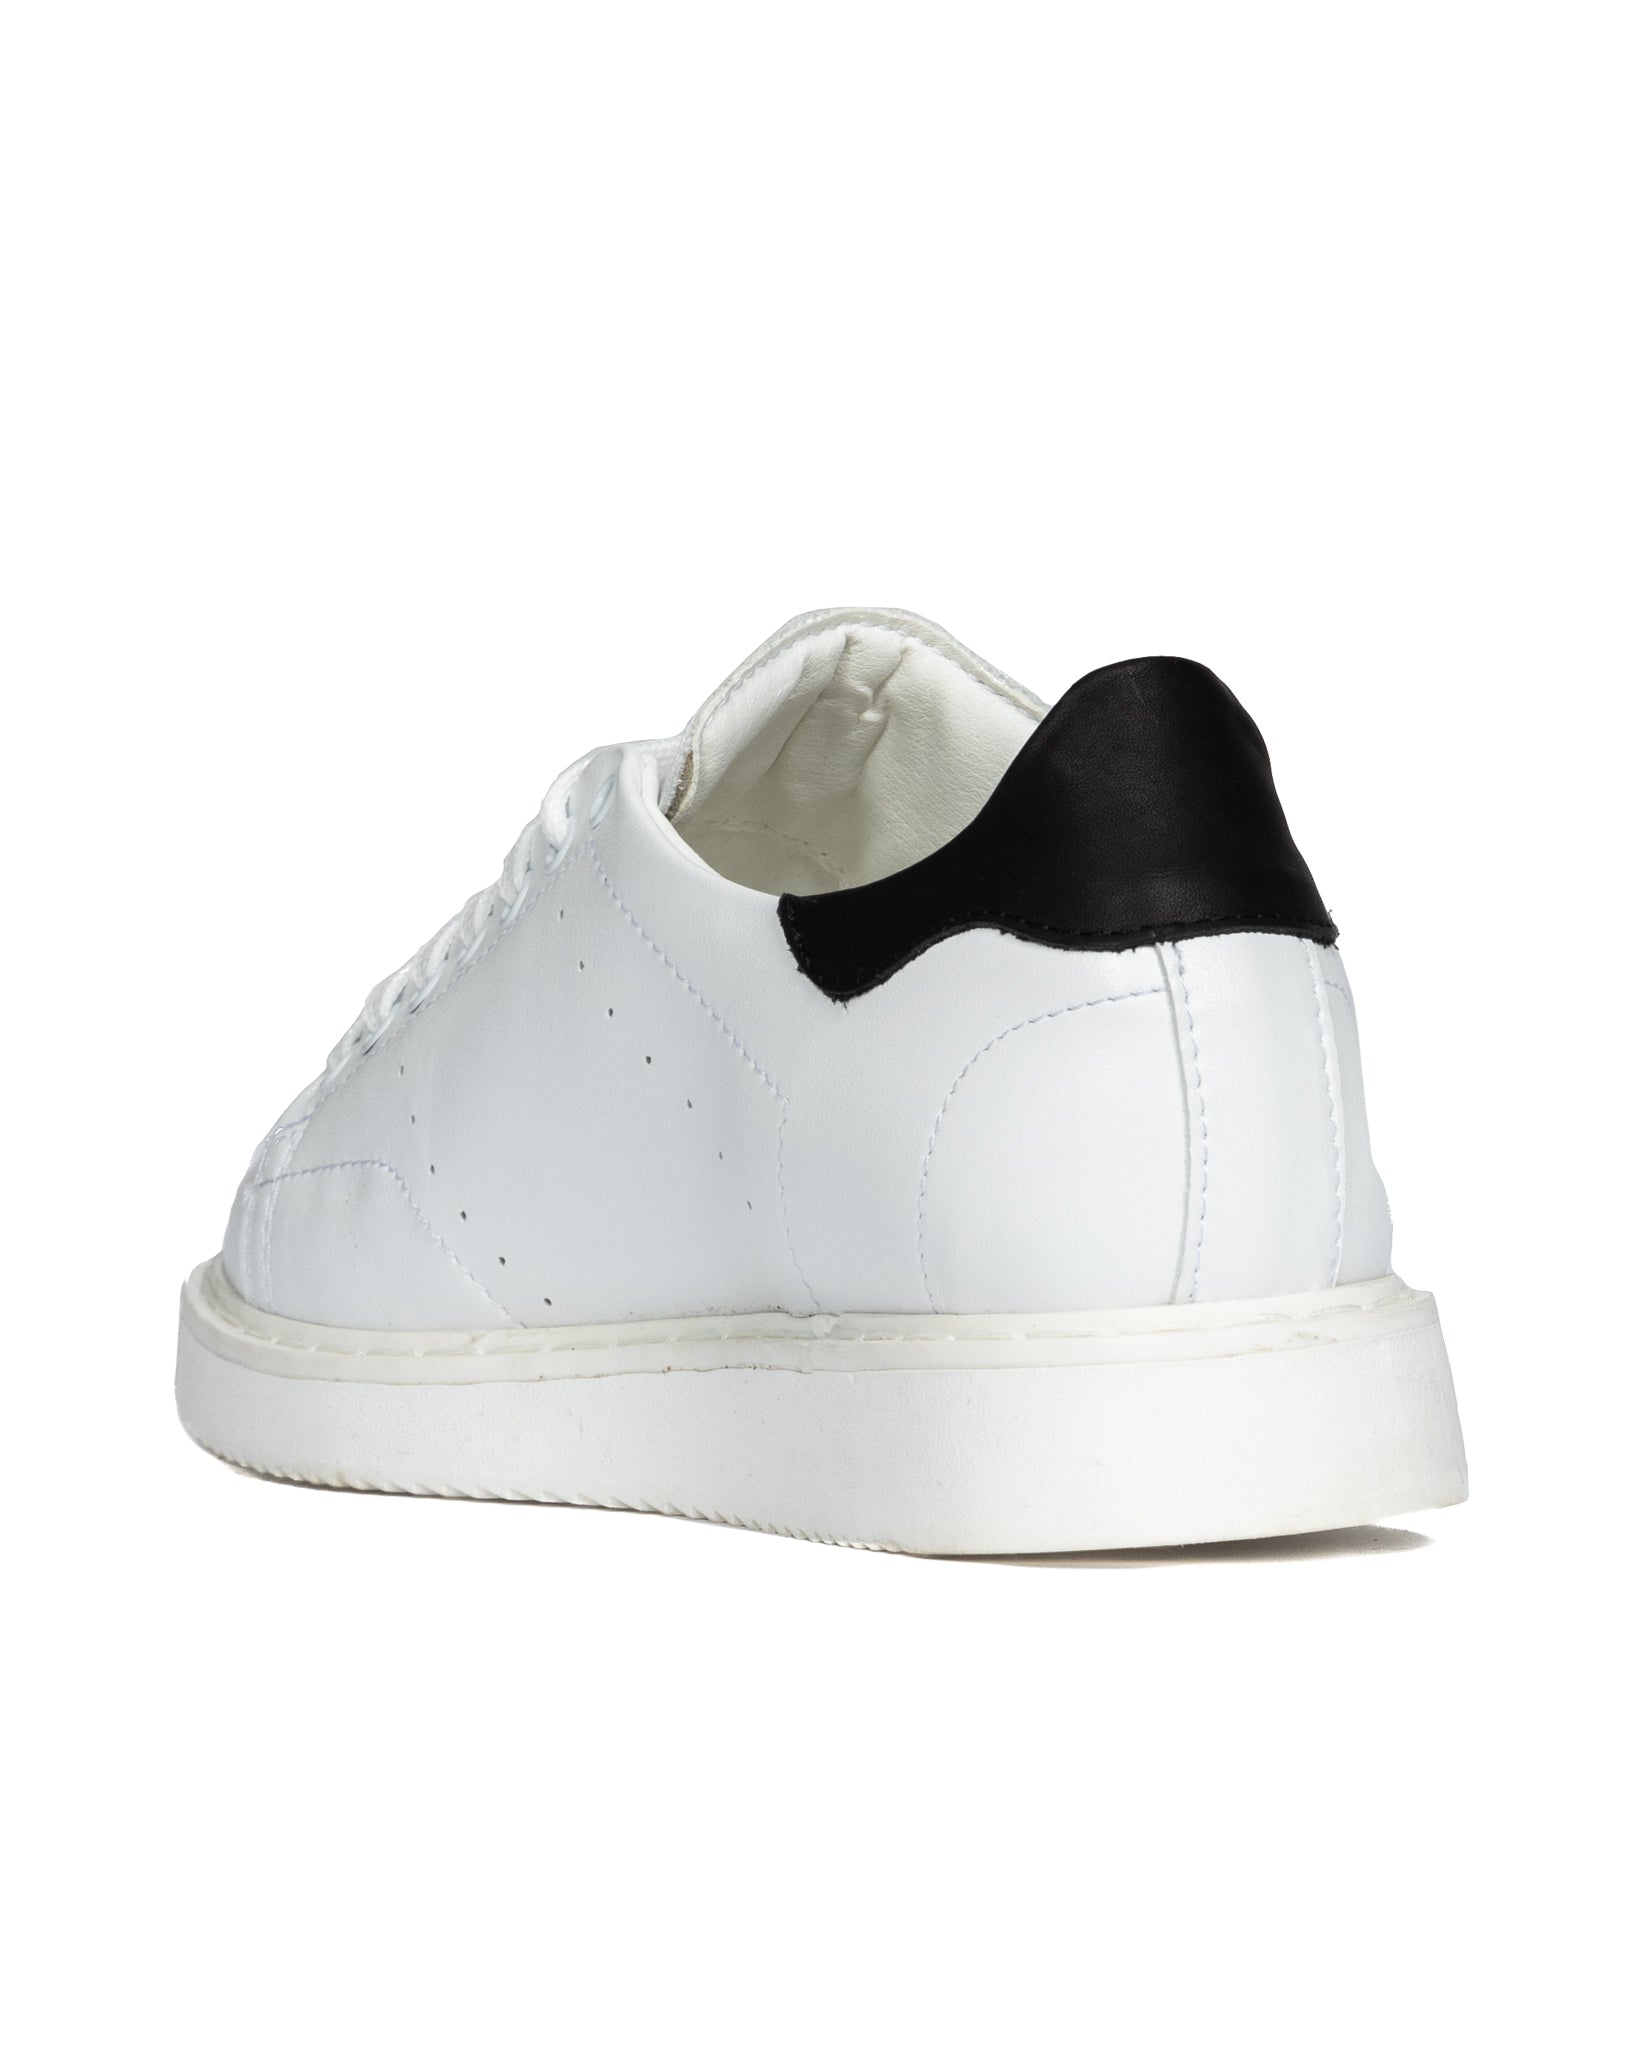 S01 - white leather sneakers with black details